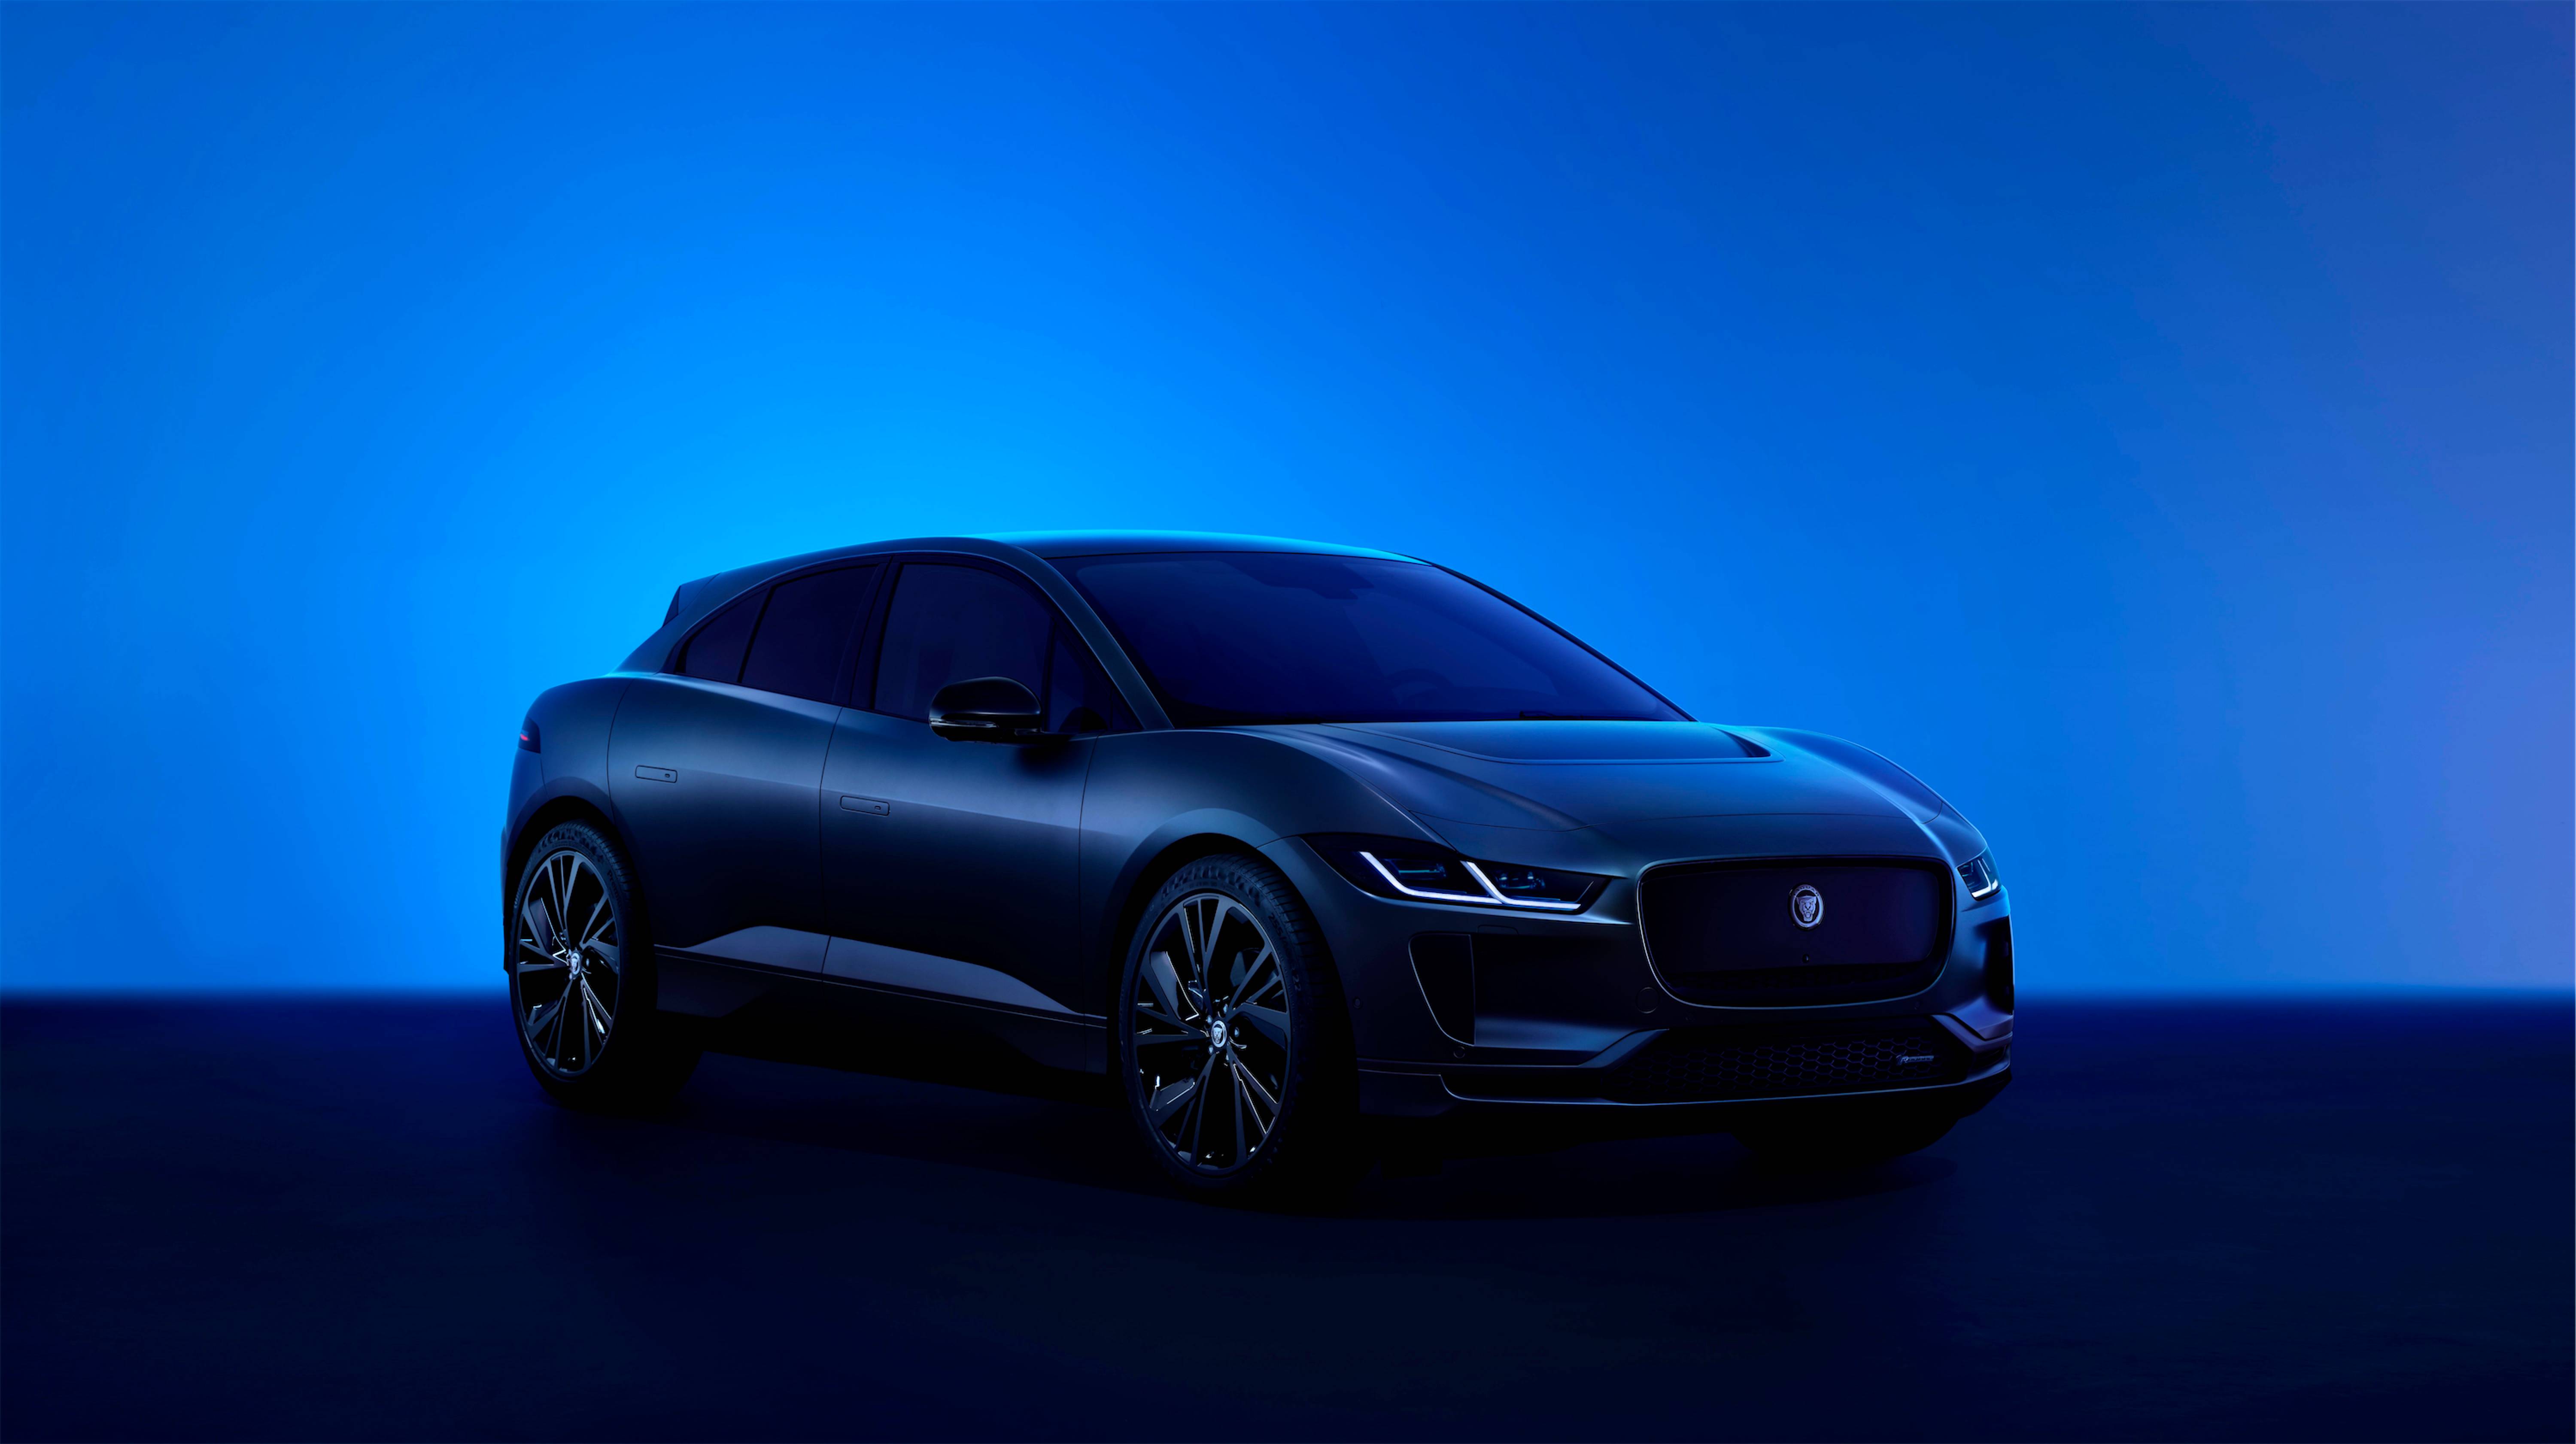 The award-winning Jaguar I-PACE is now more distinctive and more desirable